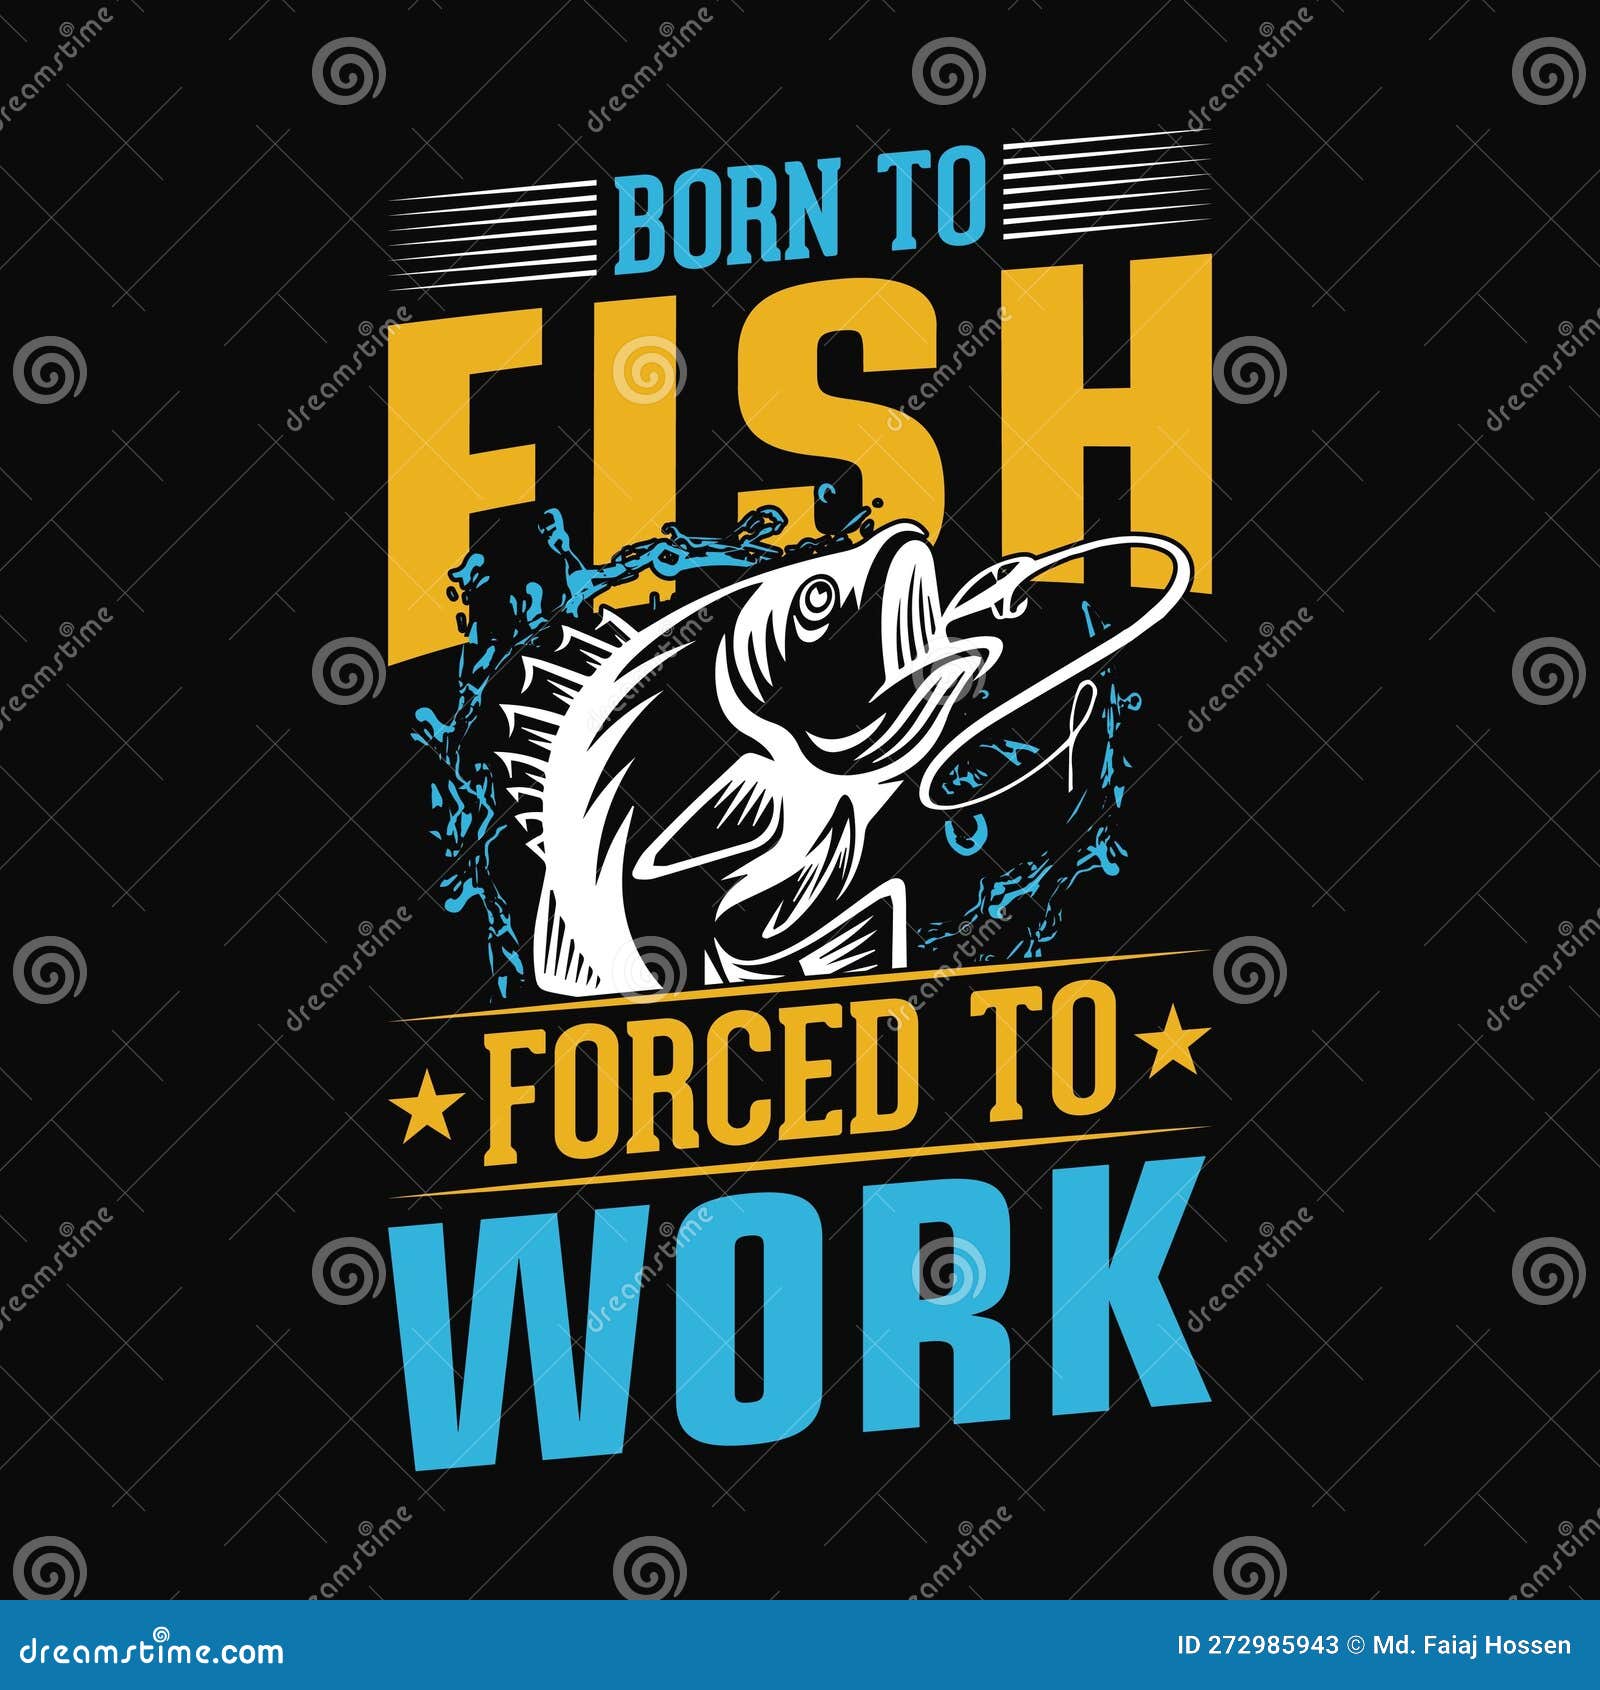 https://thumbs.dreamstime.com/z/born-to-fish-forced-to-work-fishing-quotes-vector-design-t-shirt-design-born-to-fish-forced-to-work-272985943.jpg